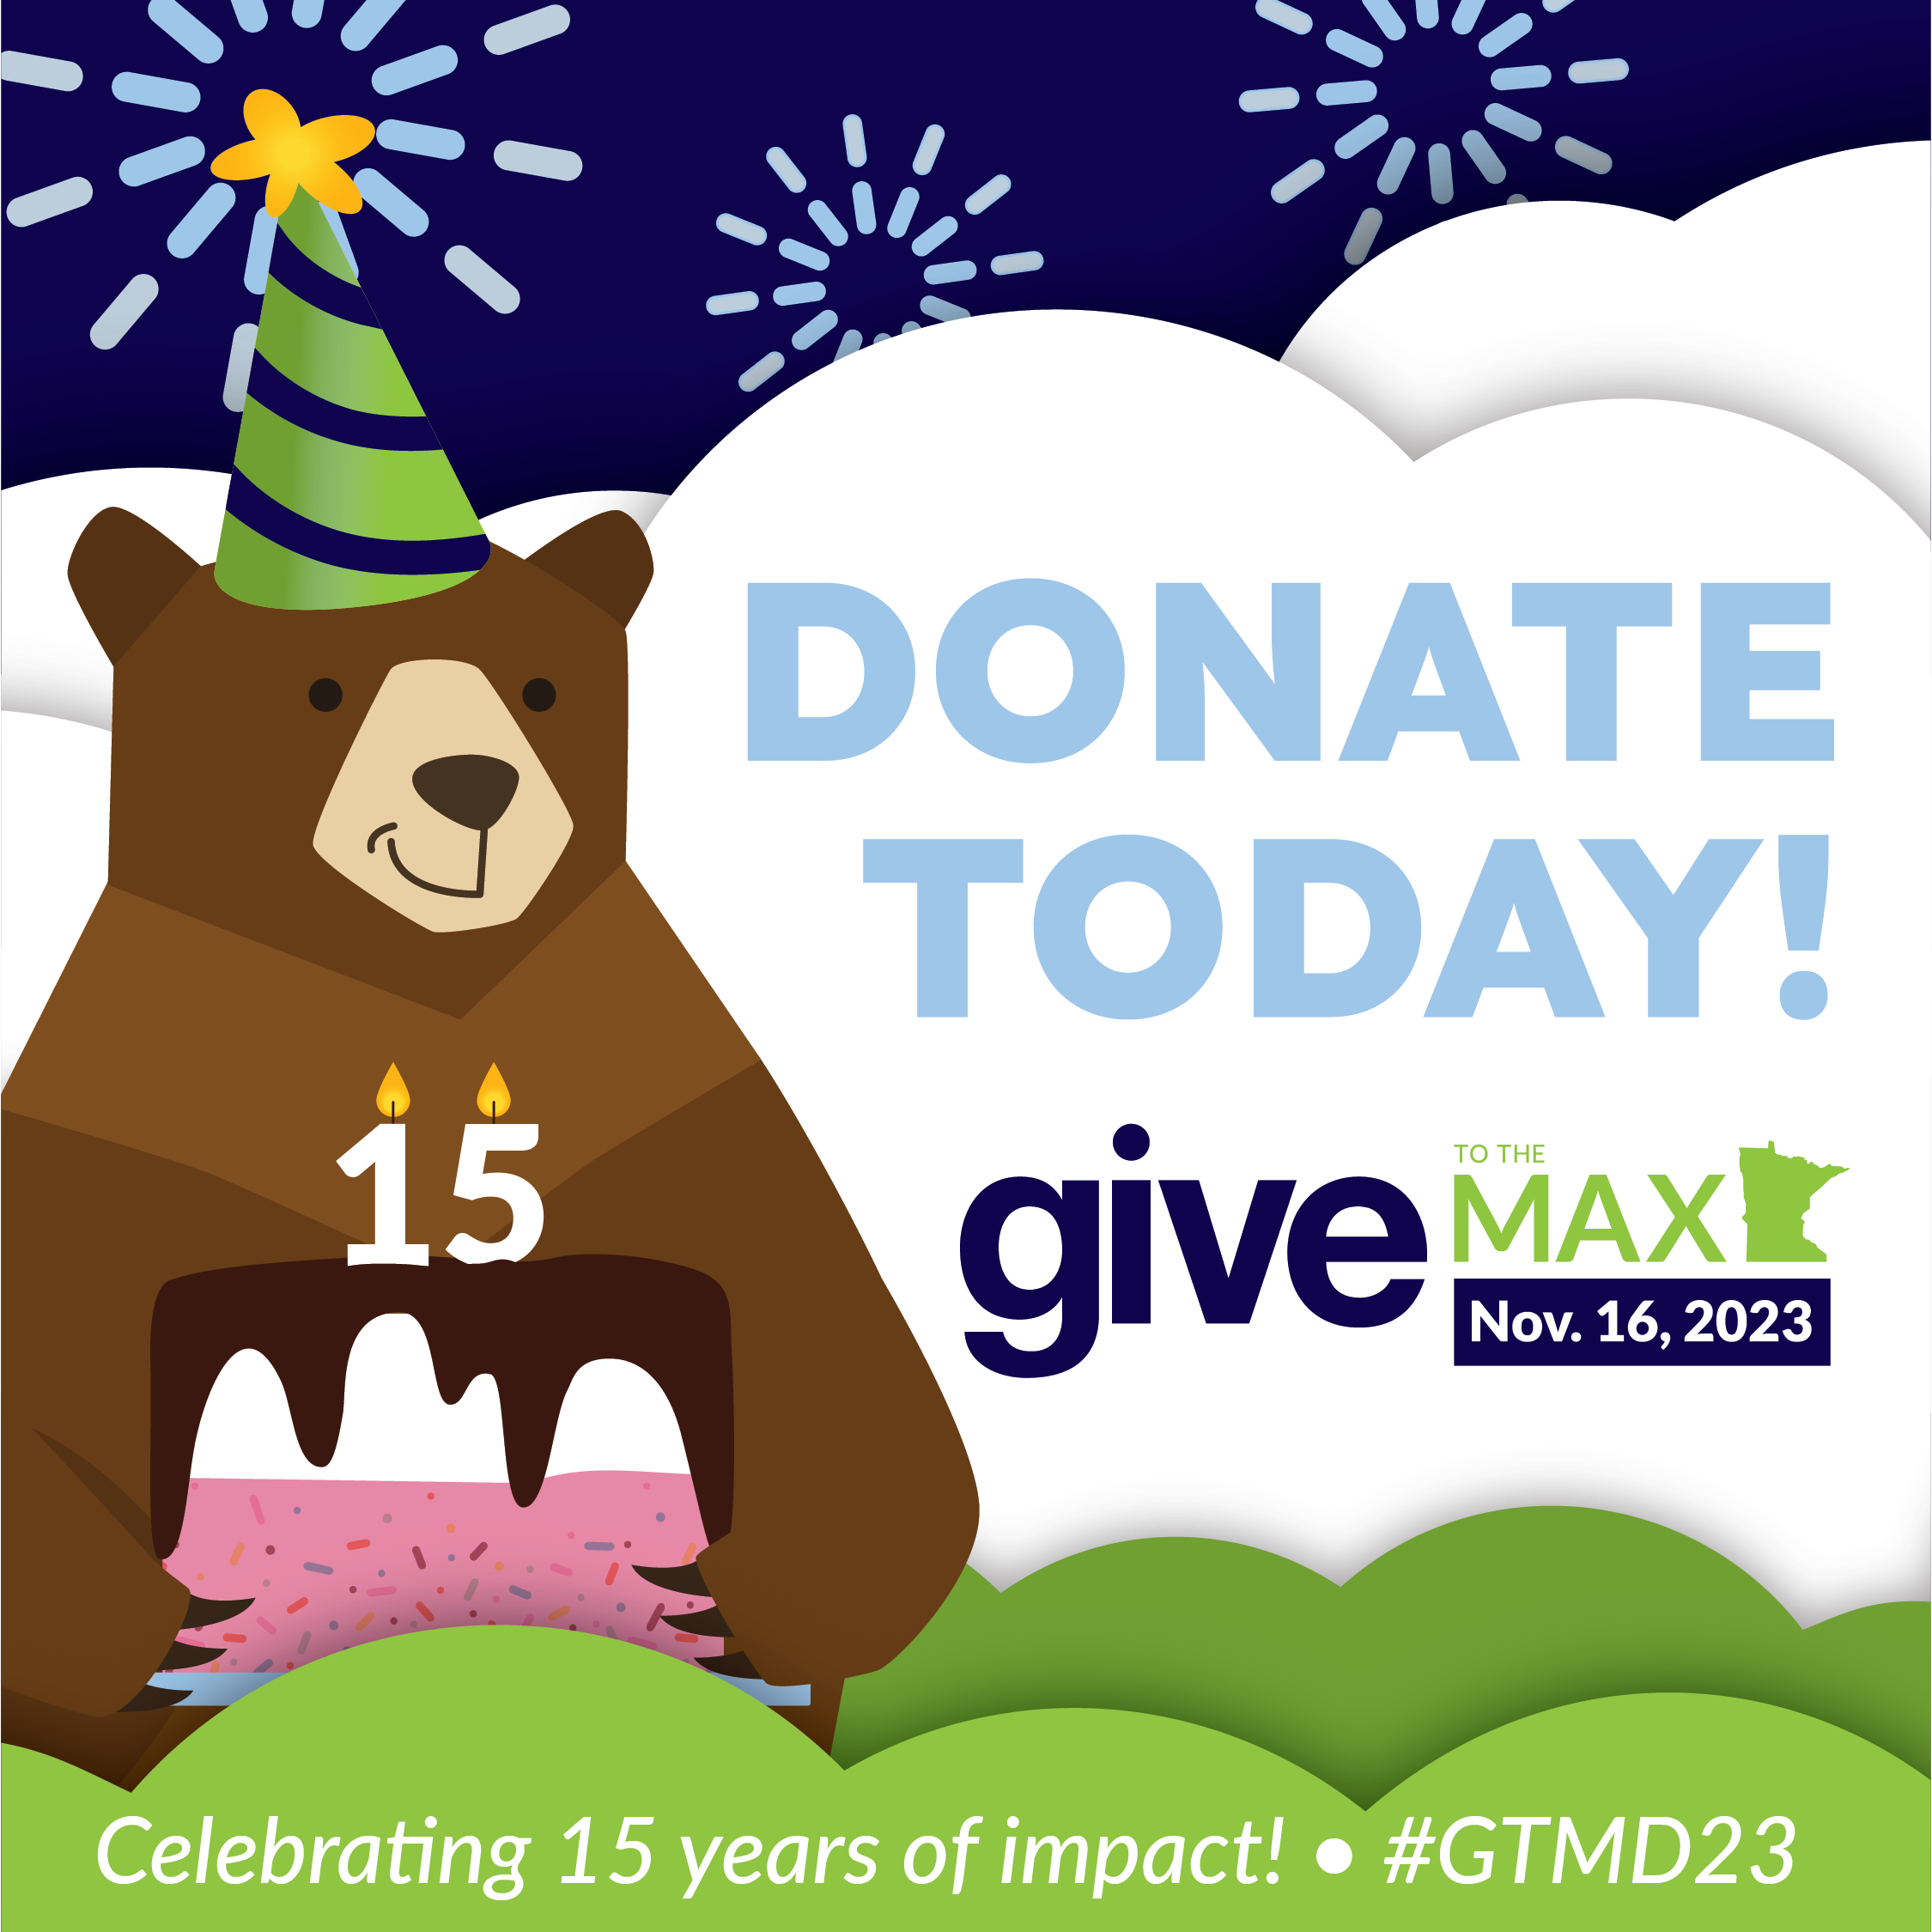 Give to the Max!